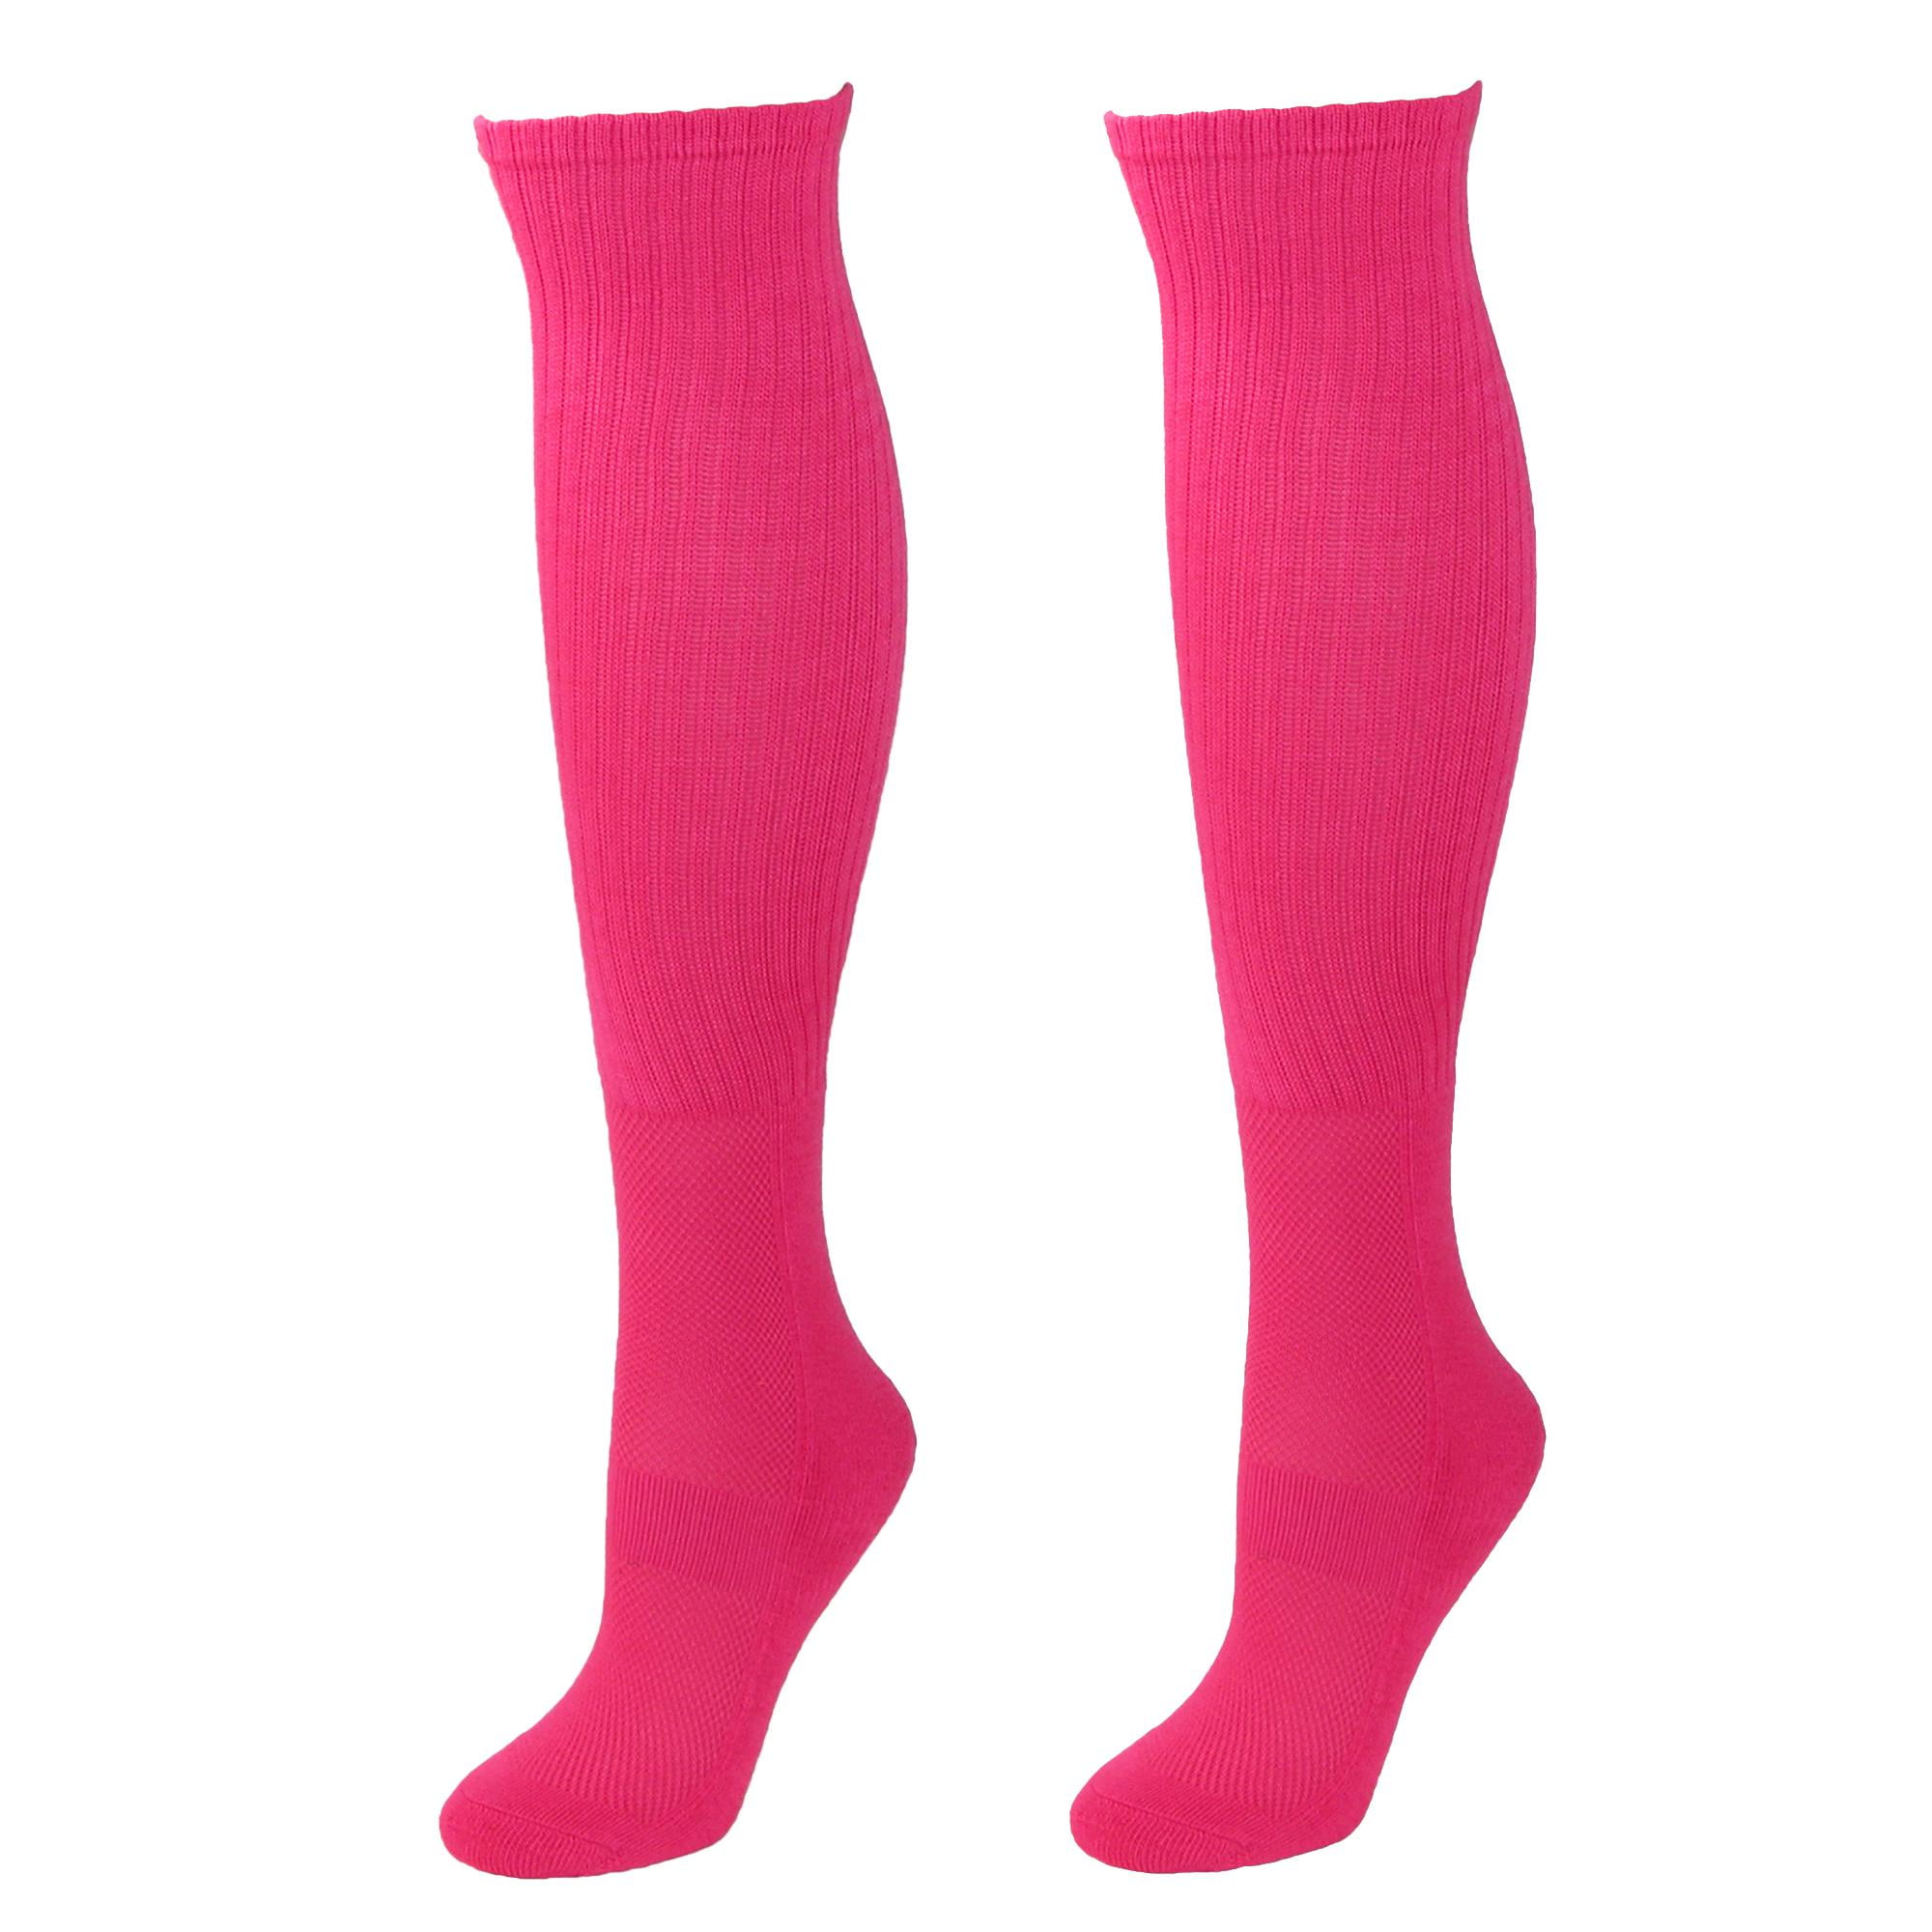 CTM Pink Tube Socks (2 Pair Pack) Extended Size Available | Walmart Canada